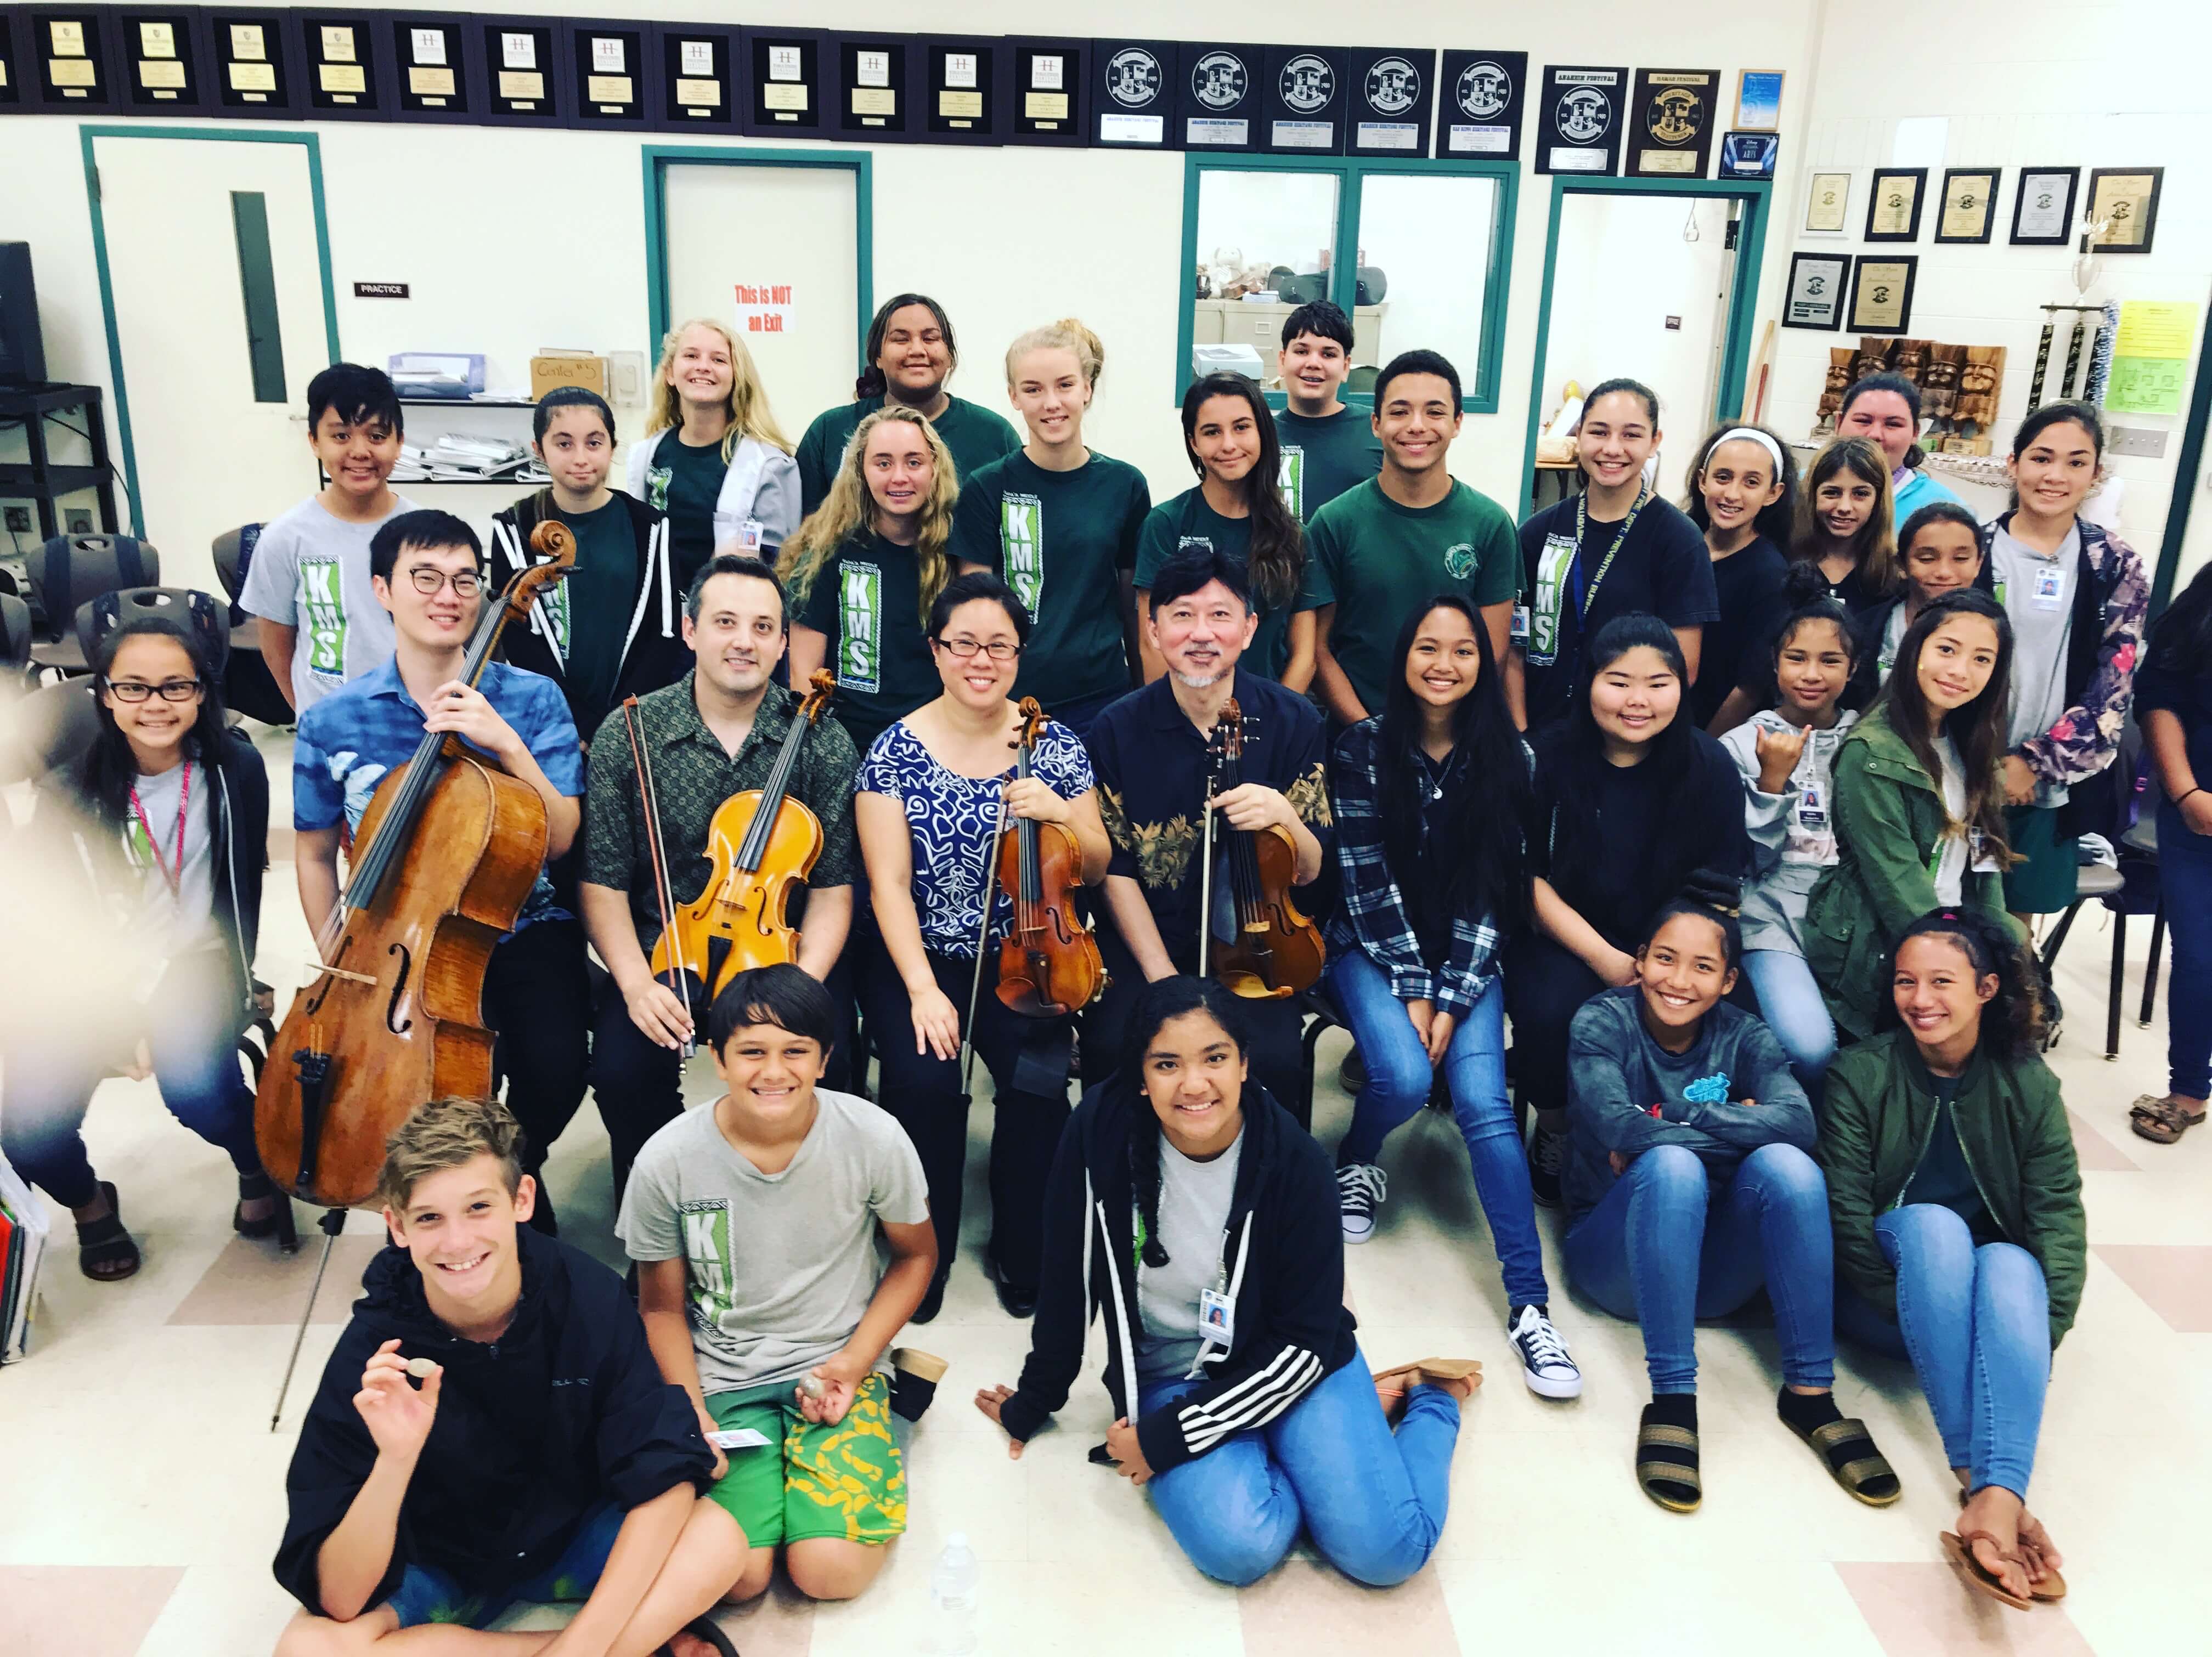 <p class="lft-cnt">Lanai High & Elementary School has been fortunate enough to have annual visits by members of Chamber Music Hawaii’s two ensembles: Spring Wind Quintet and Honolulu Brass Quintet.  These annual visits from both ensembles have been valuable assets to the development of the band program here...</p><p  class="rgt-cnt"><img src="https://www.chambermusichawaii.org/wp-content/uploads/2021/04/paka-project.jpg"></p>